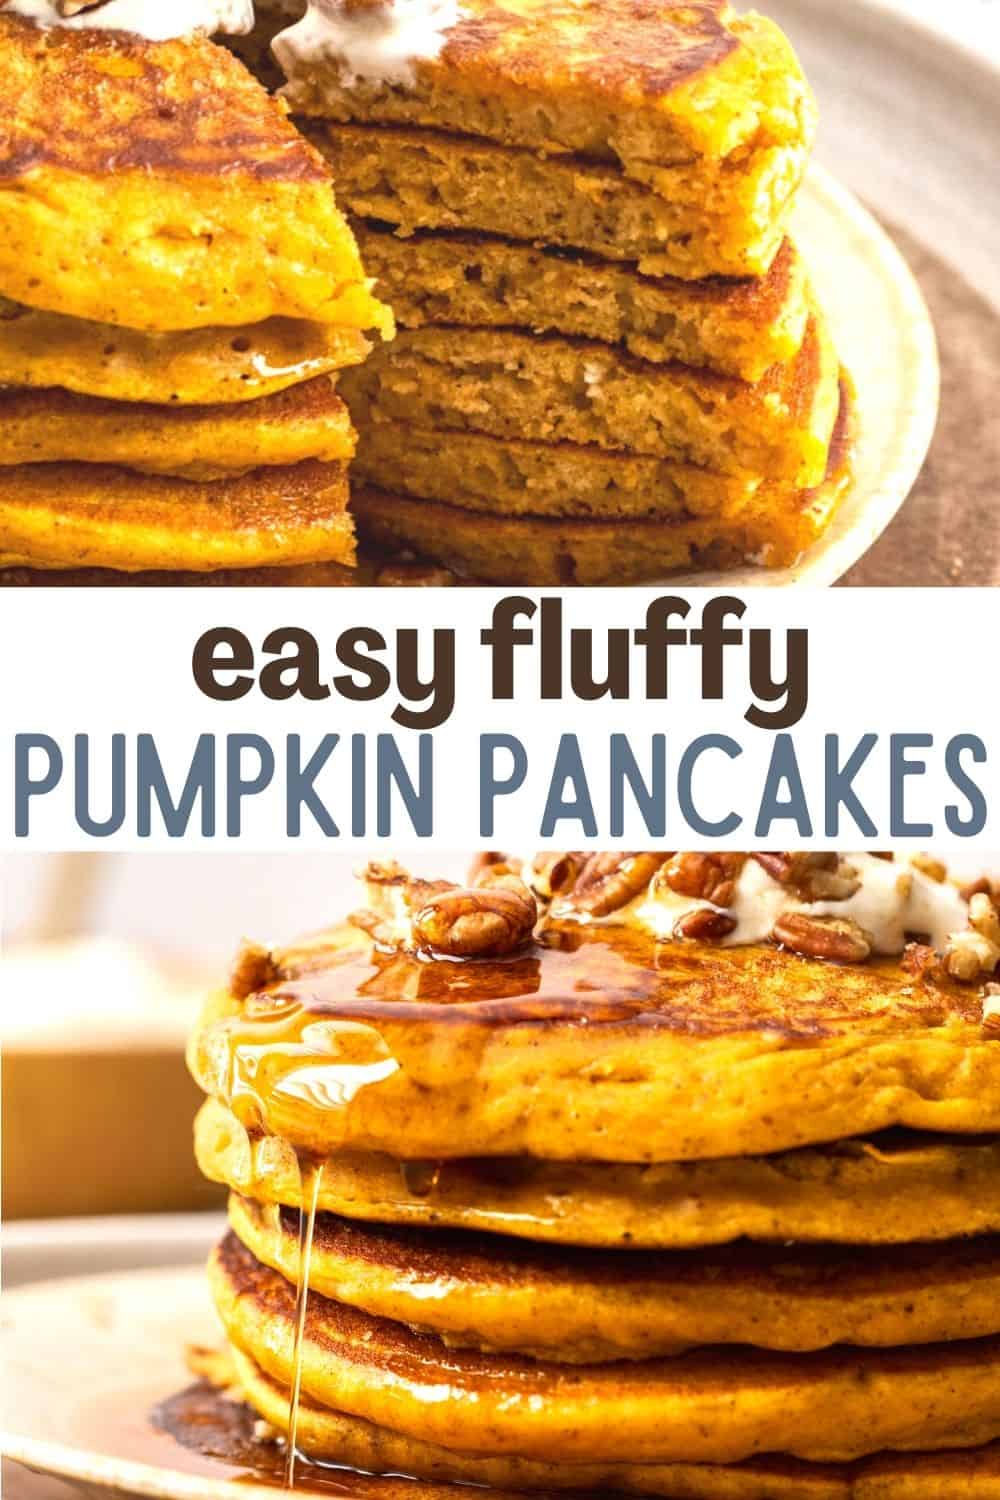 This pumpkin pancakes recipe makes thick and fluffy pancakes that are so moist and delicious! Dust with cinnamon sugar or maple syrup and a sprinkle of toasted pecans to warm up a chilly morning breakfast!